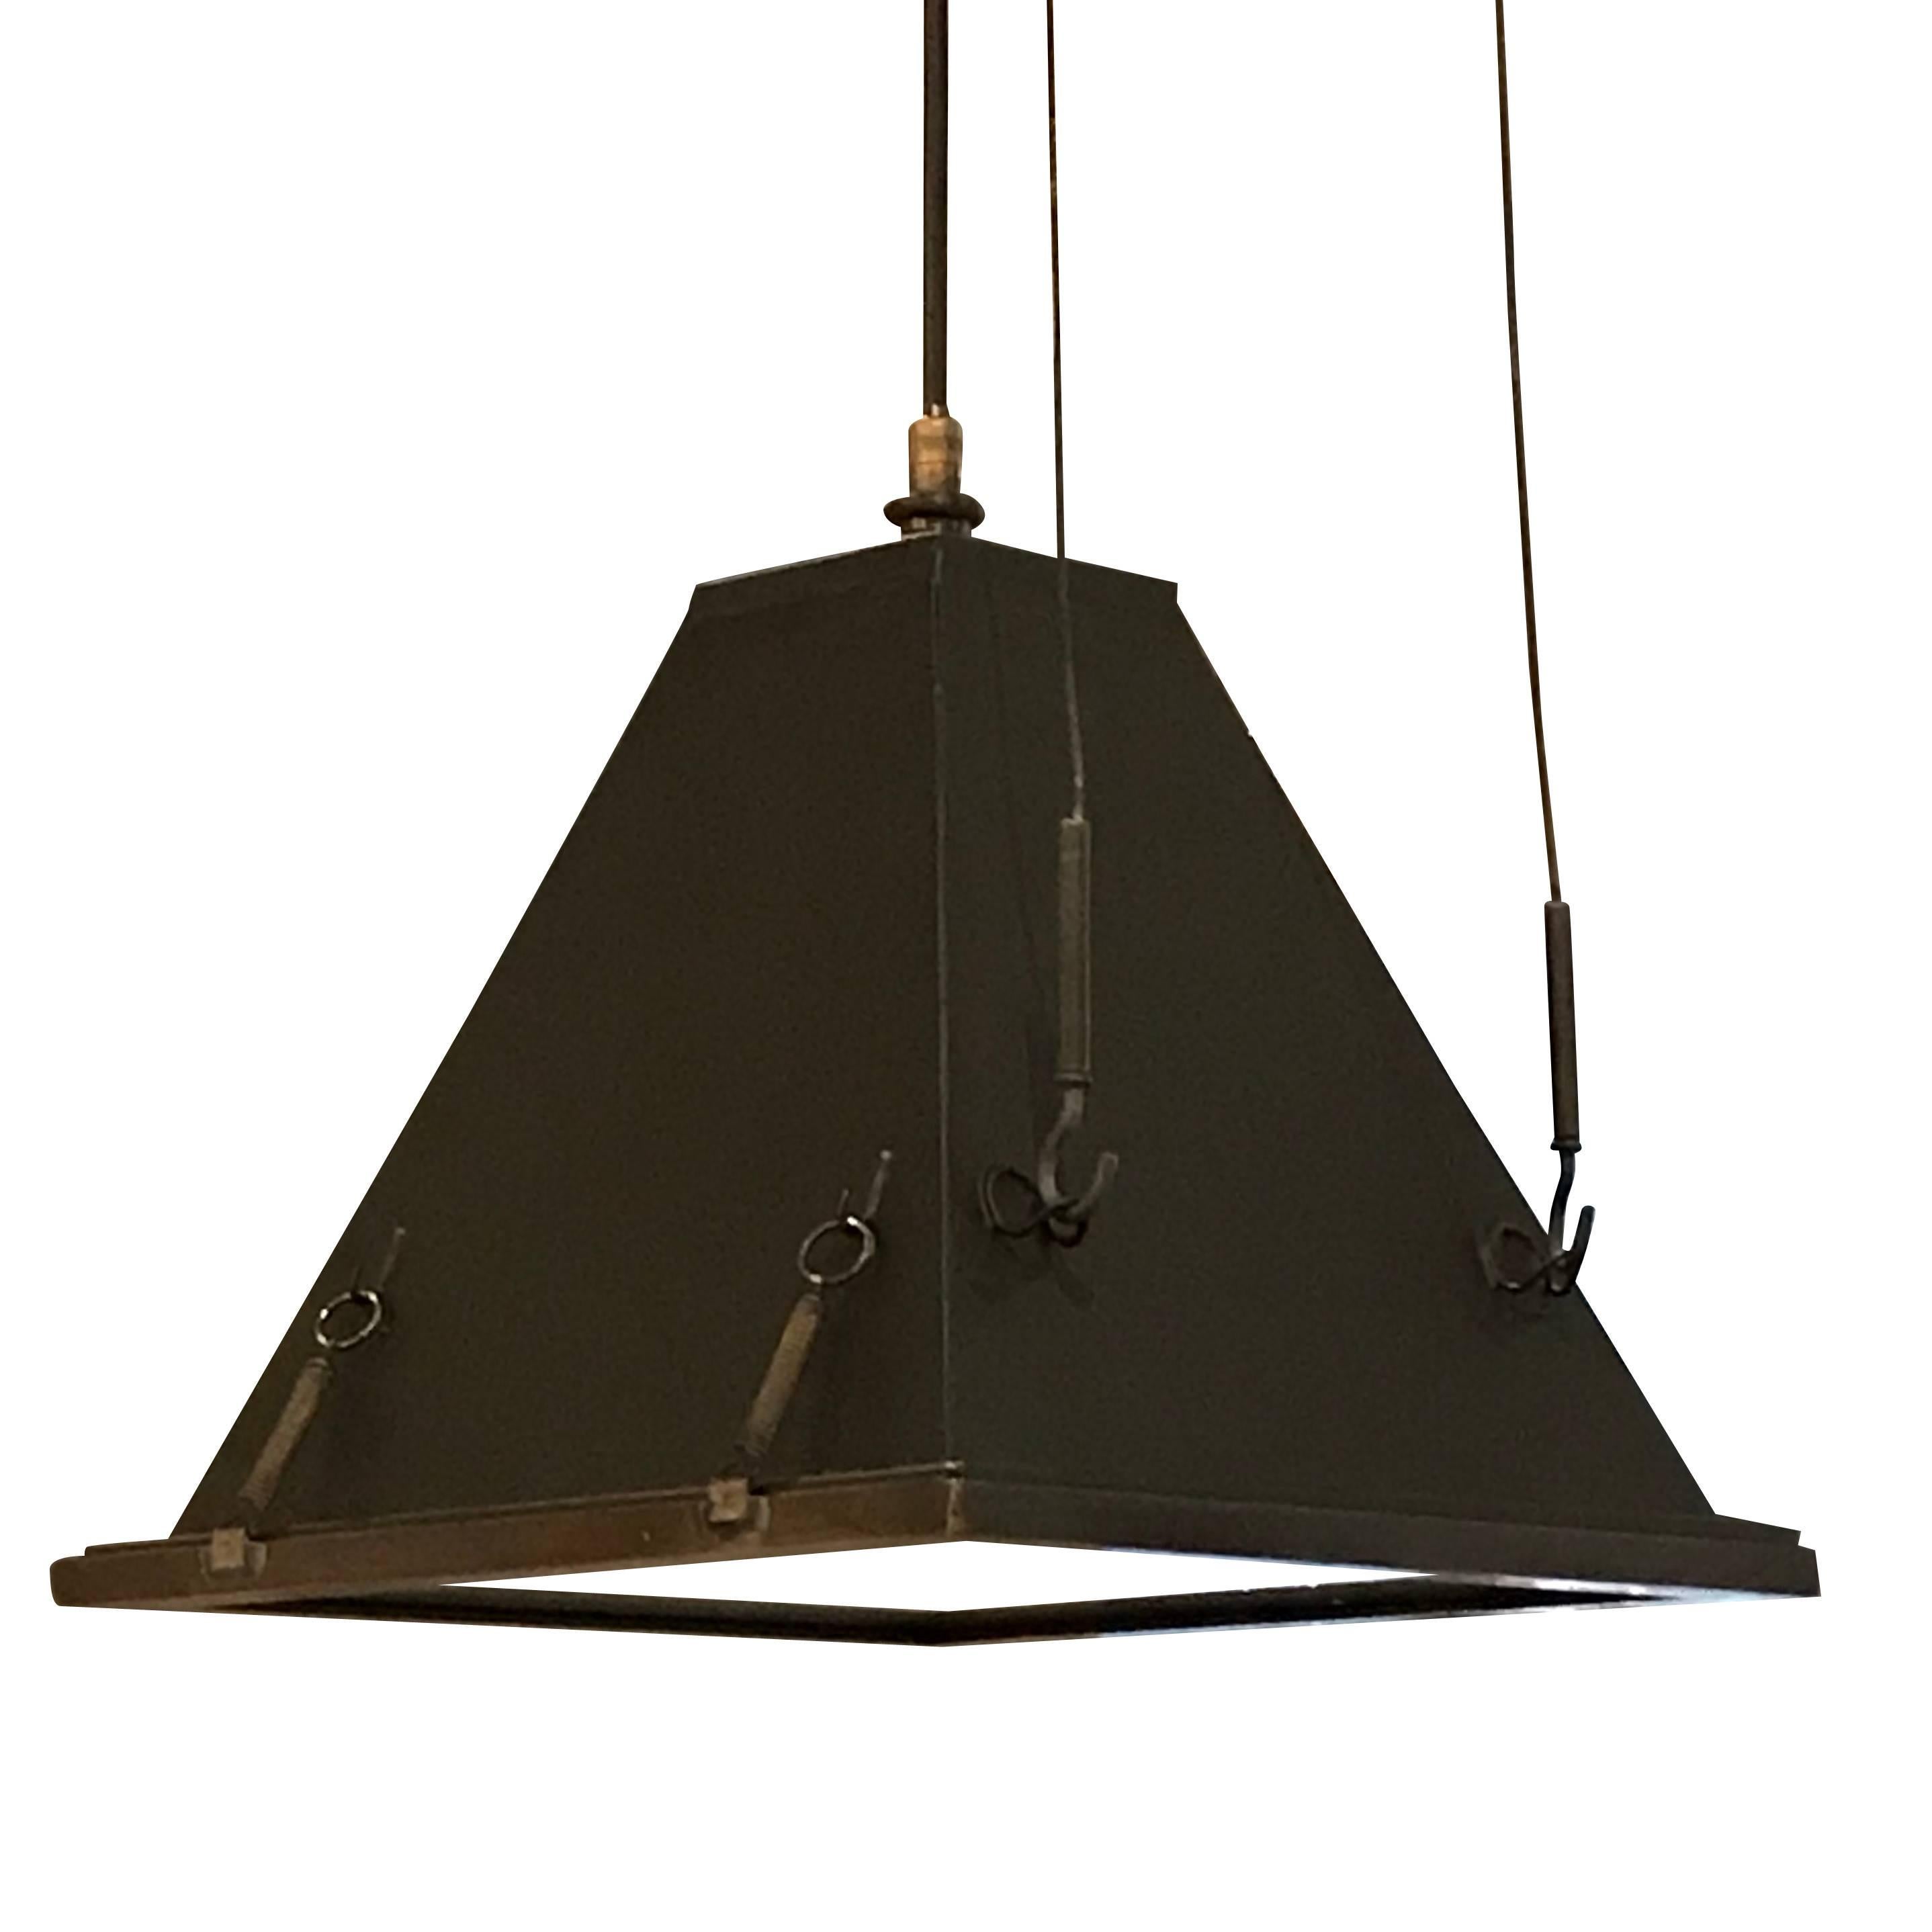 Mid century Italian pair pyramid shaped black steel industrial lights with brass trim detailing.
Adjustable metal hanging supports.
Originally housed in an Italian film factory.
Height of 10" is the fixture itself.
Overall height is 46" (